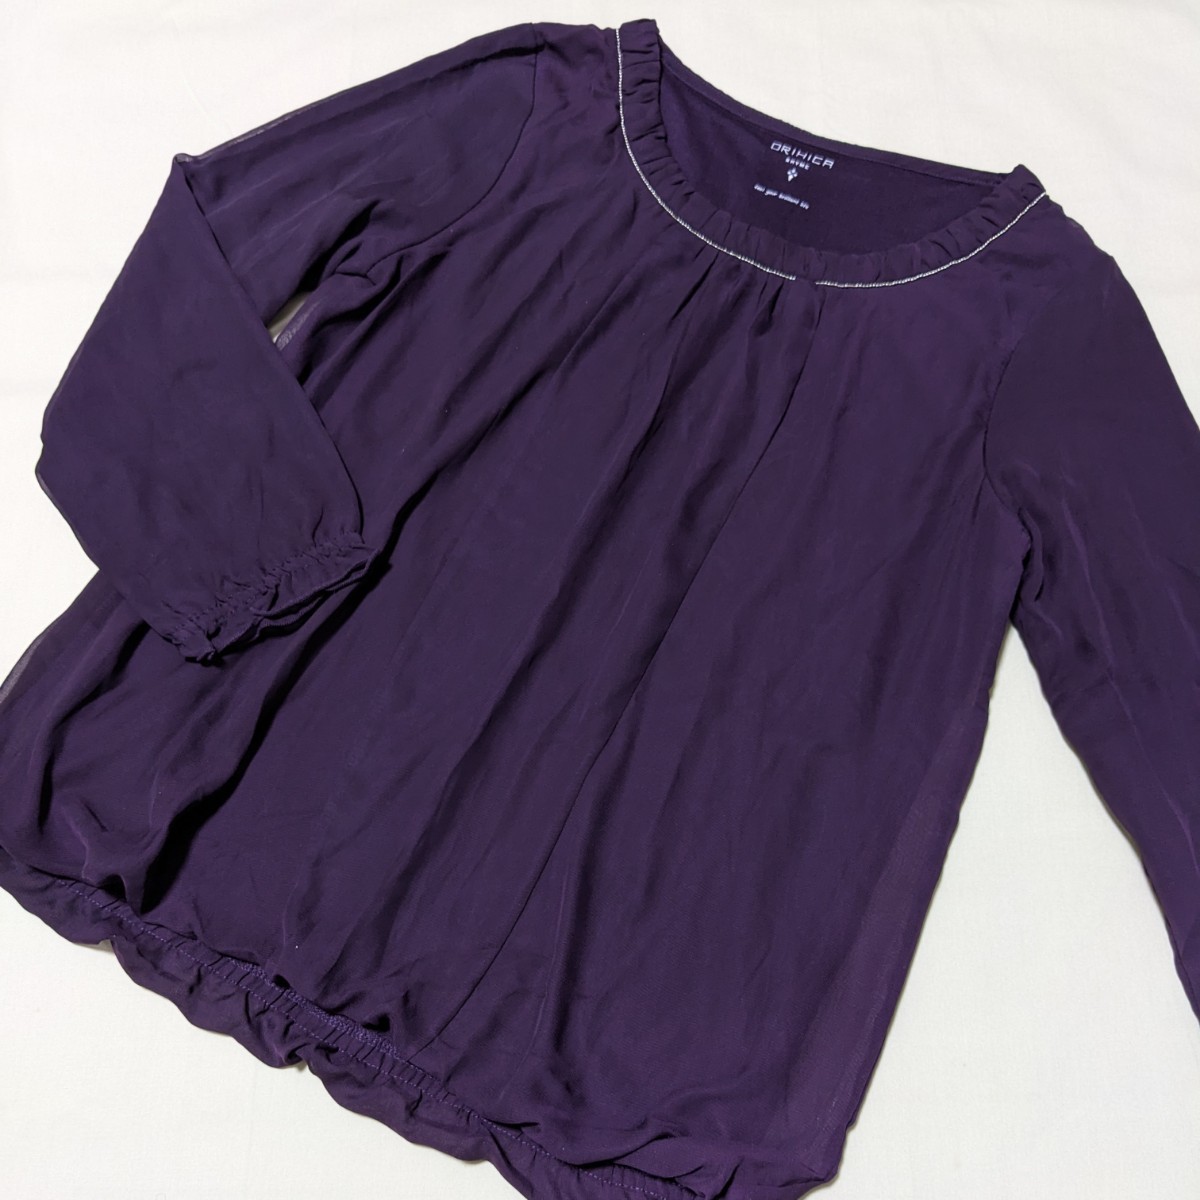 +FZ10 ORIHICA RHYMEolihika lime formal lady's M long sleeve cut and sewn pull over purple purple business ceremony 